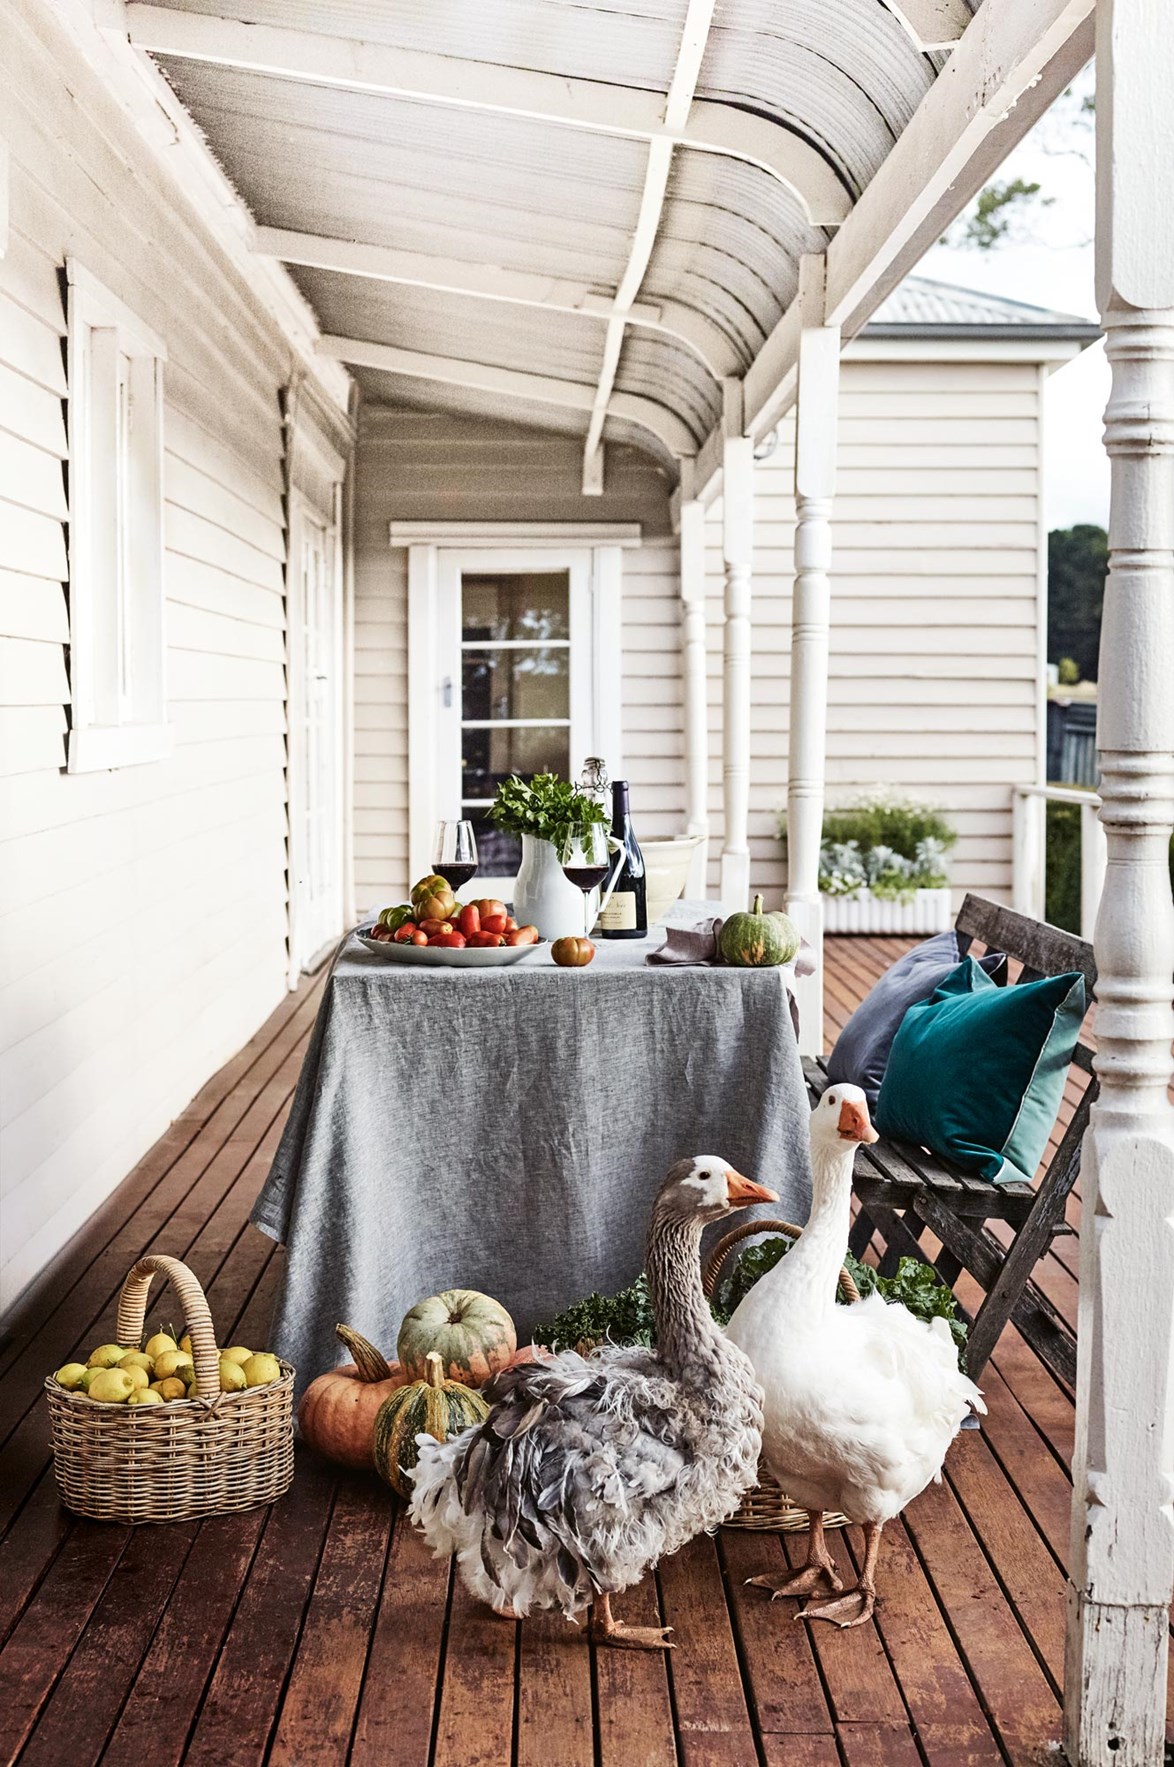 Sebastopol geese check out the autumn harvest laid out on the verandah of [chef Annie Smithers' farm house](https://www.homestolove.com.au/central-victoria-farm-garden-18818|target="_blank"). Much of the fresh fruit and vegetables will be used at her restaurant [Du Fermier](https://anniesmithers.com.au/|target="_blank"|rel="nofollow"), a 10-minute drive away. *Photo: Mark Roper / Stylist: Lee Blaylock*